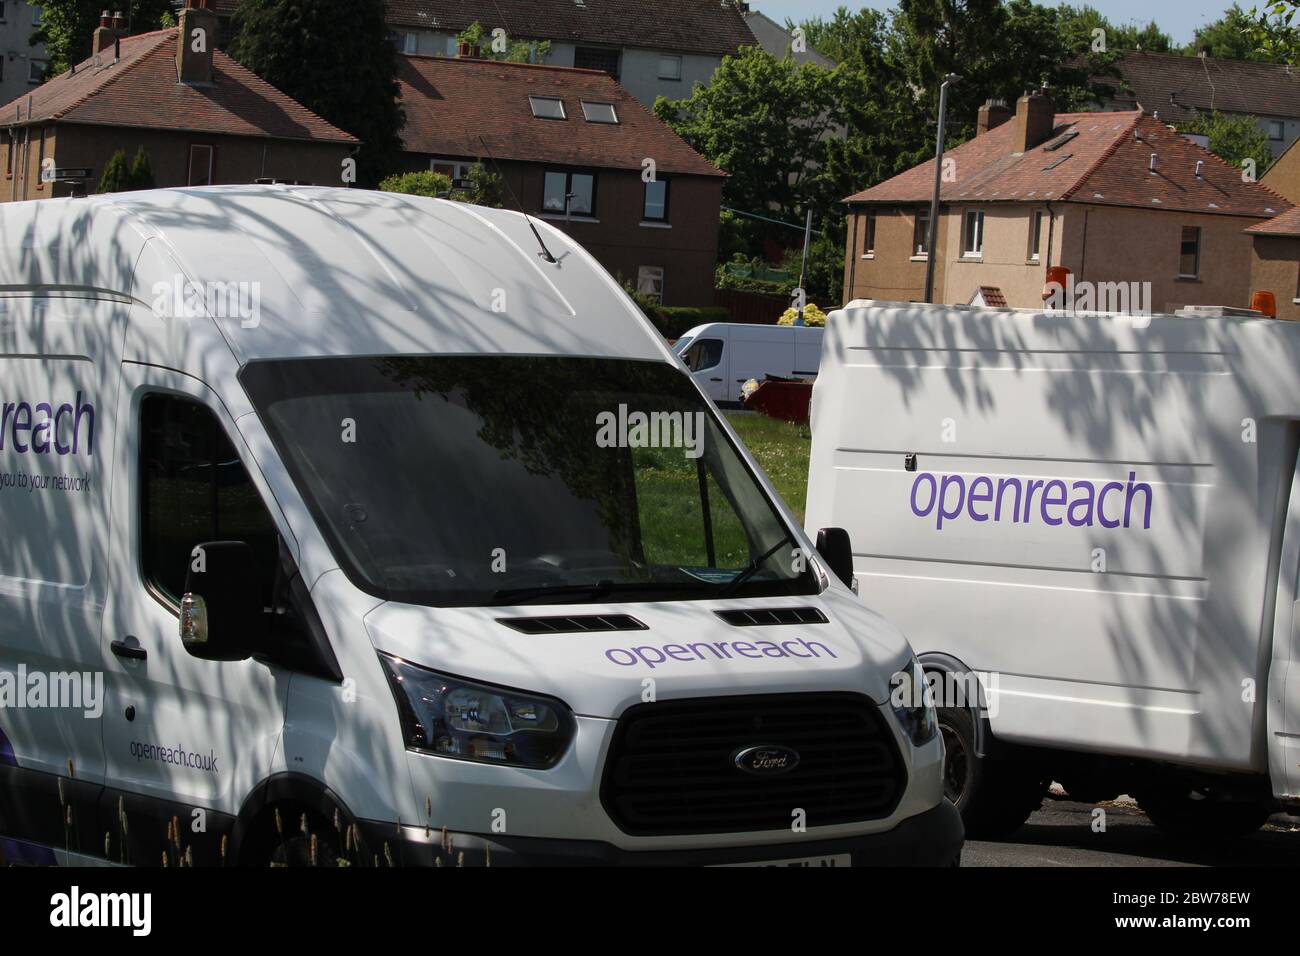 Two Openreach White Vans on a 